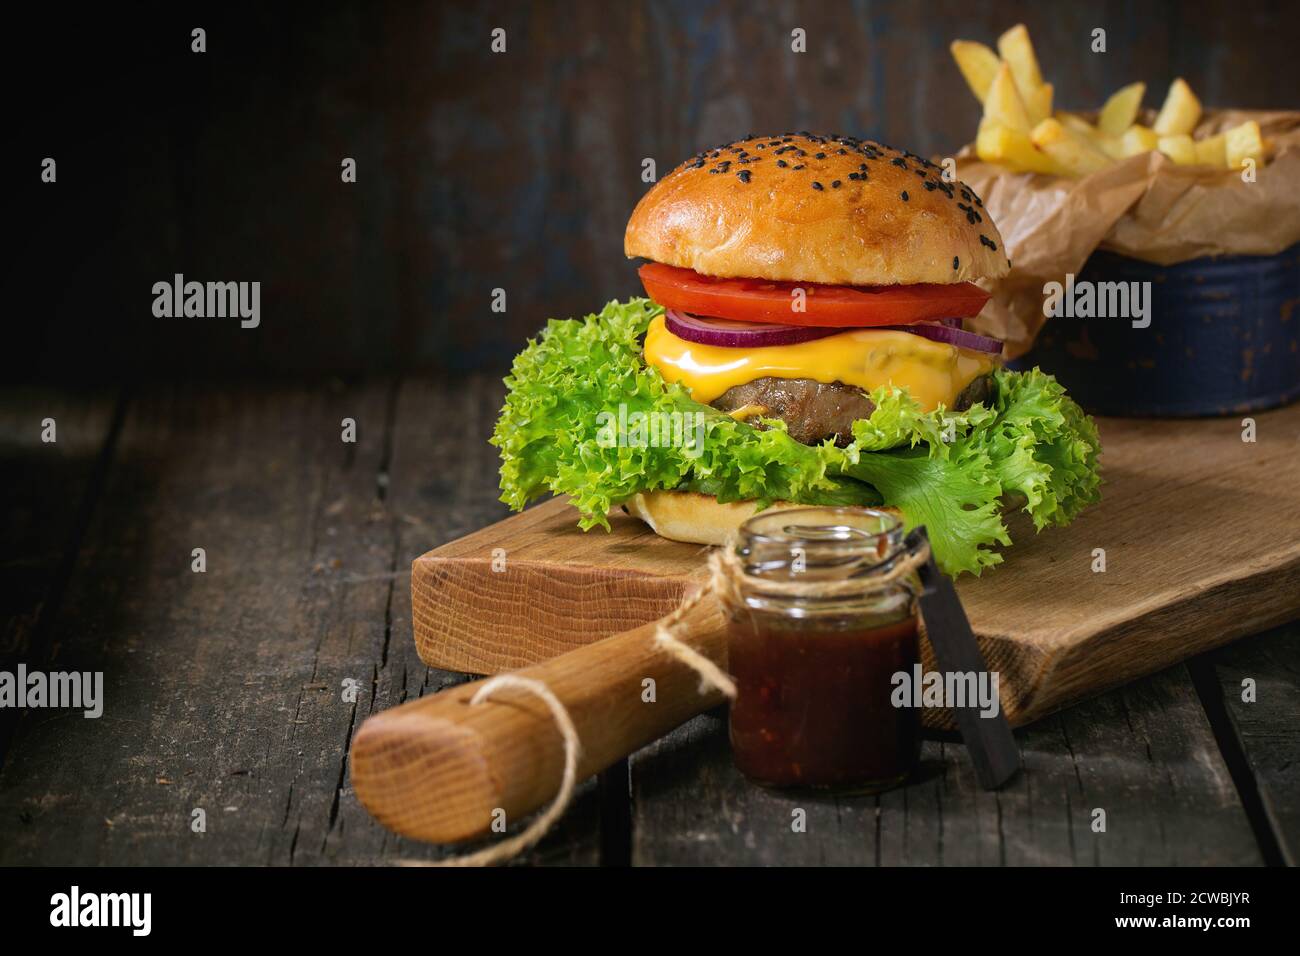 Fresh homemade burger with black sesame seeds on wooden cutting board with fried potatoes, served with ketchup sauce in glass jar over old wooden tabl Stock Photo